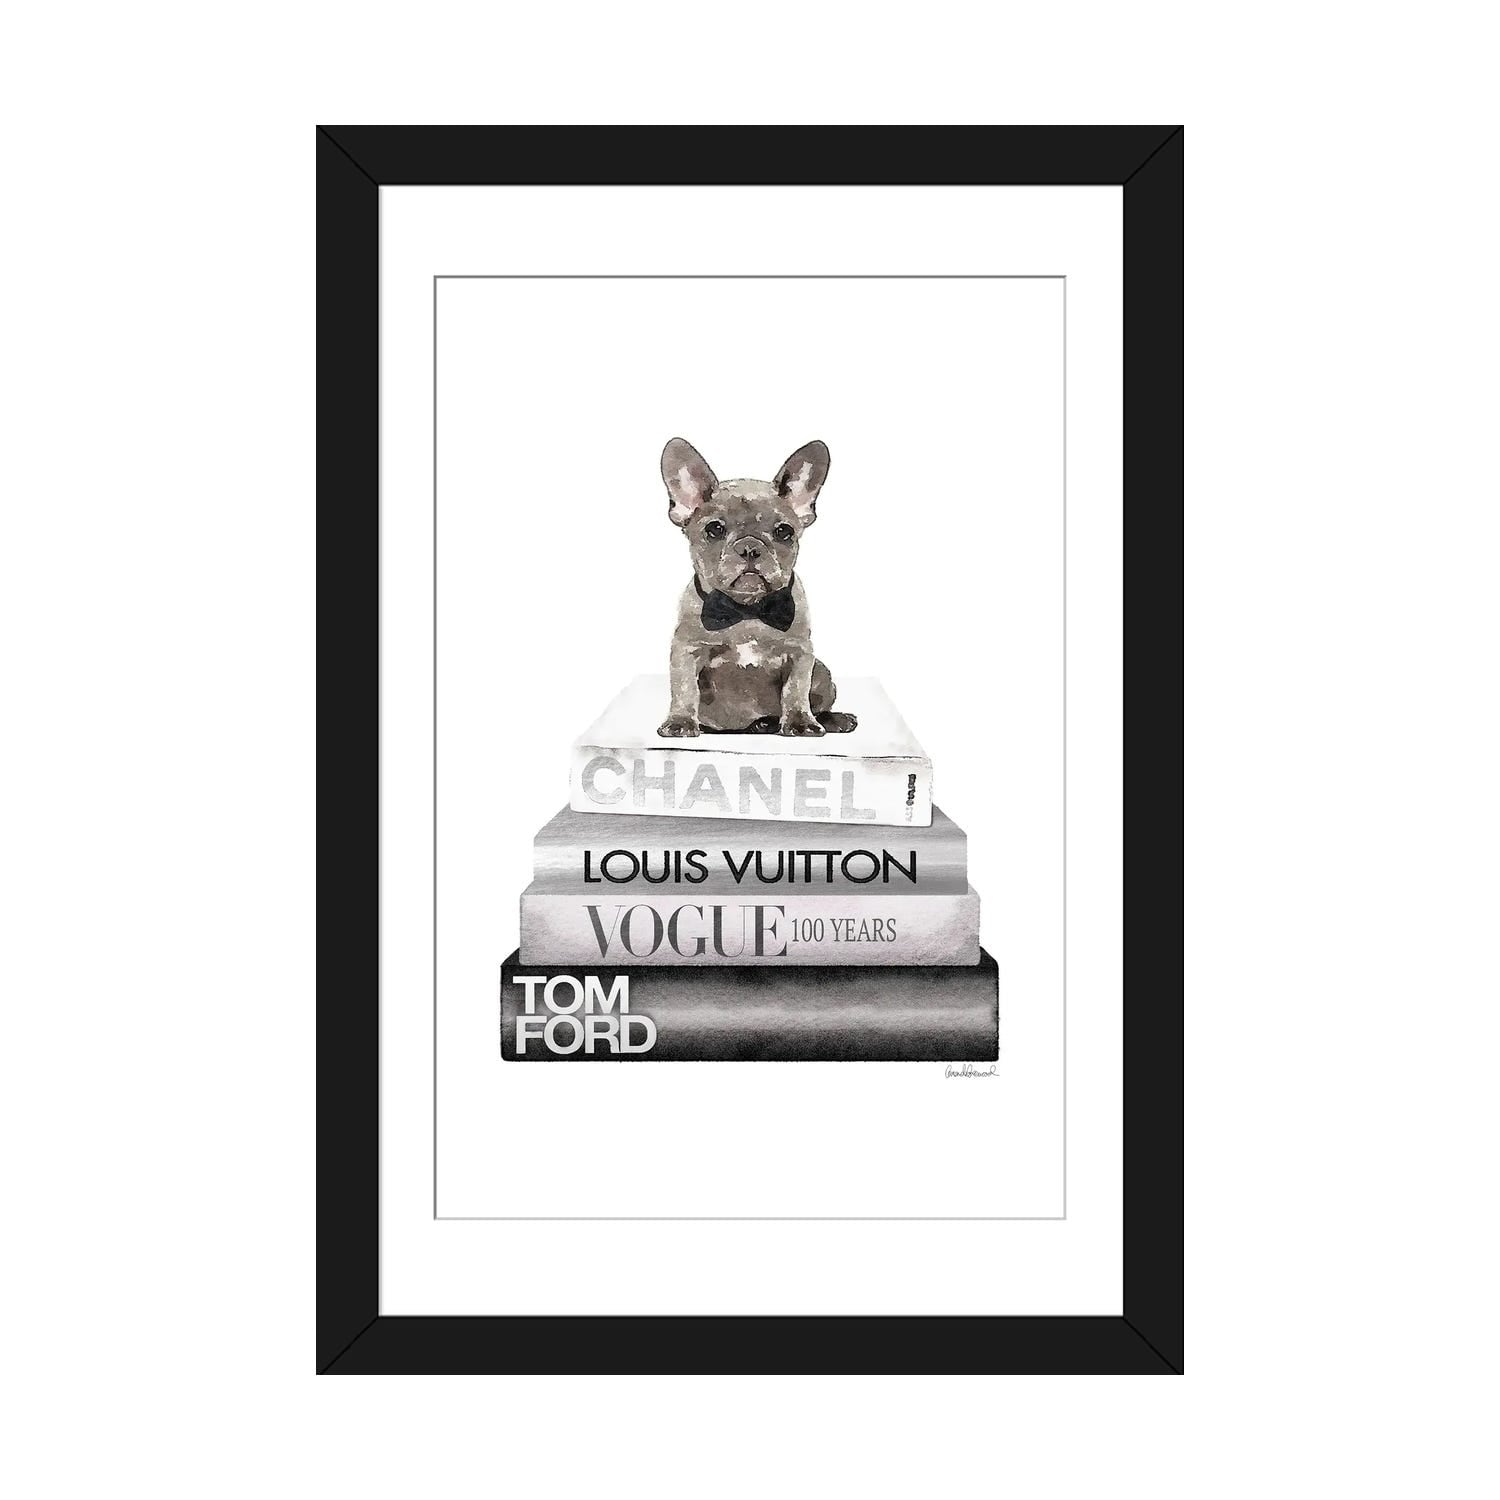 Stupell Industries 30 in. x 40 in. Book Stack Fashion French Bulldog by Amanda  Greenwood Printed Canvas Wall Art agp-117_cn_30x40 - The Home Depot